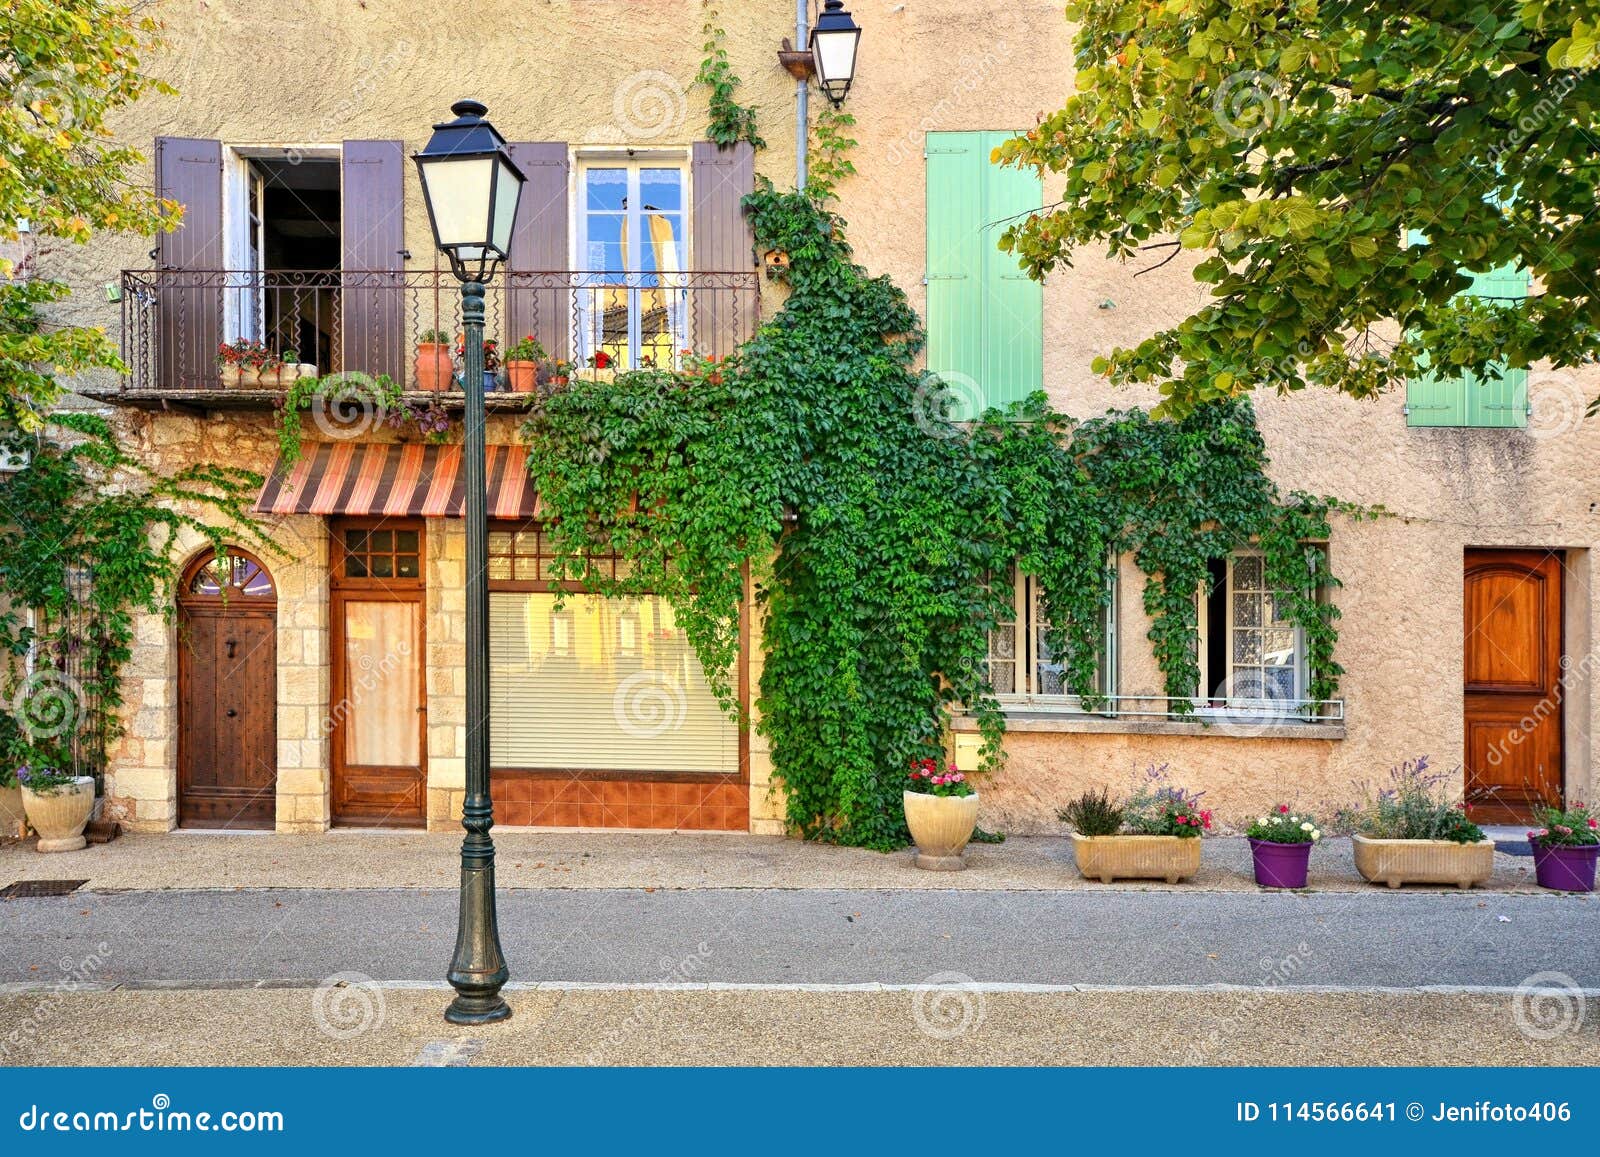 leafy house fronts with shuttered windows, provence, france